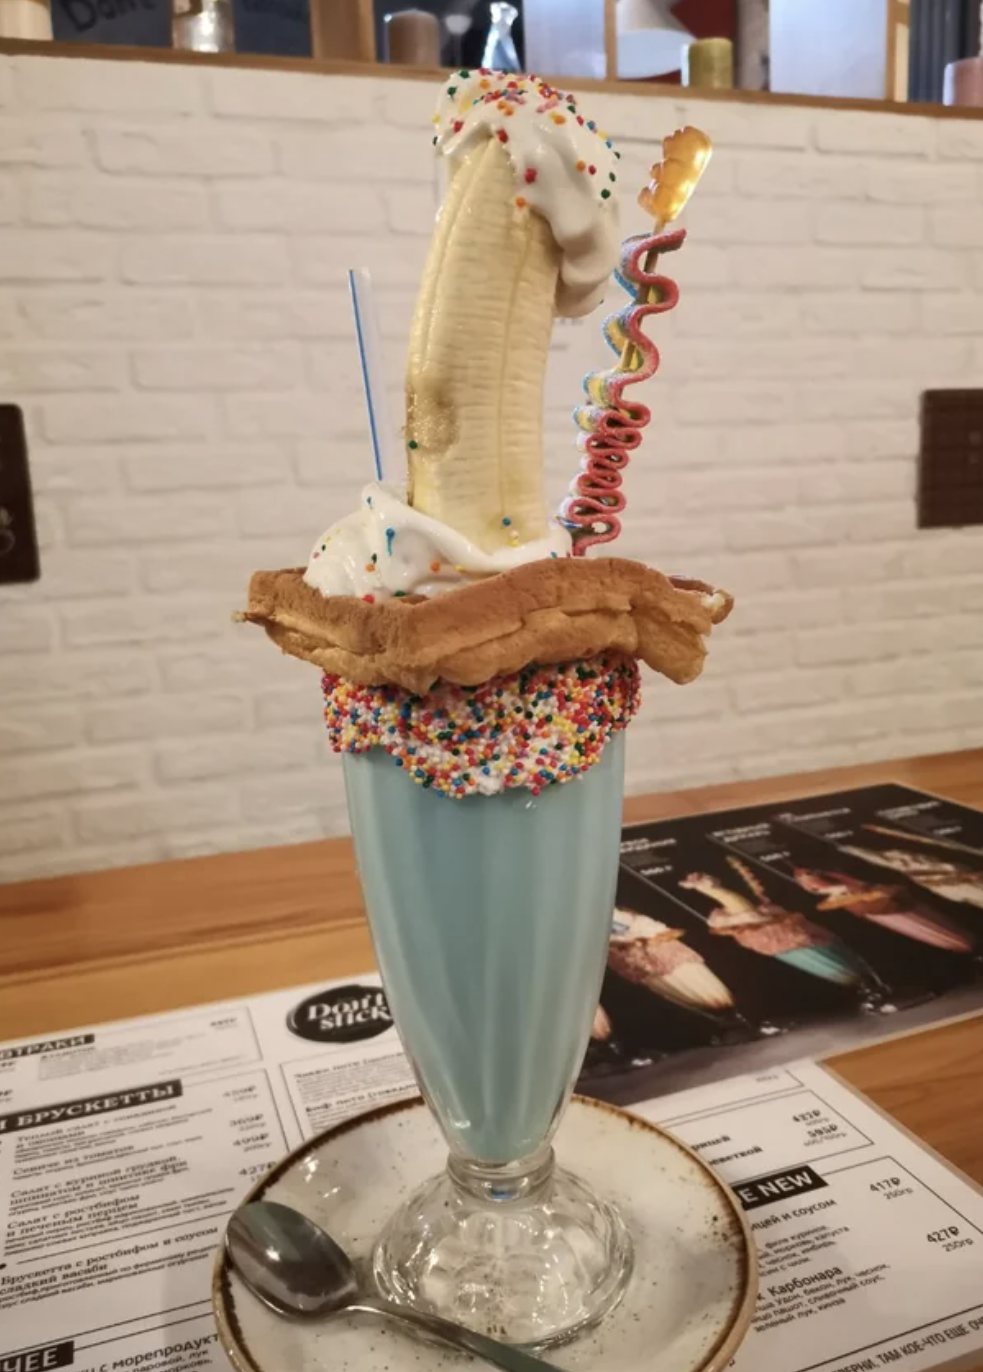 A milkshake is stacked with sprinkles, a waffle, a banana, sour candy, and whipped cream